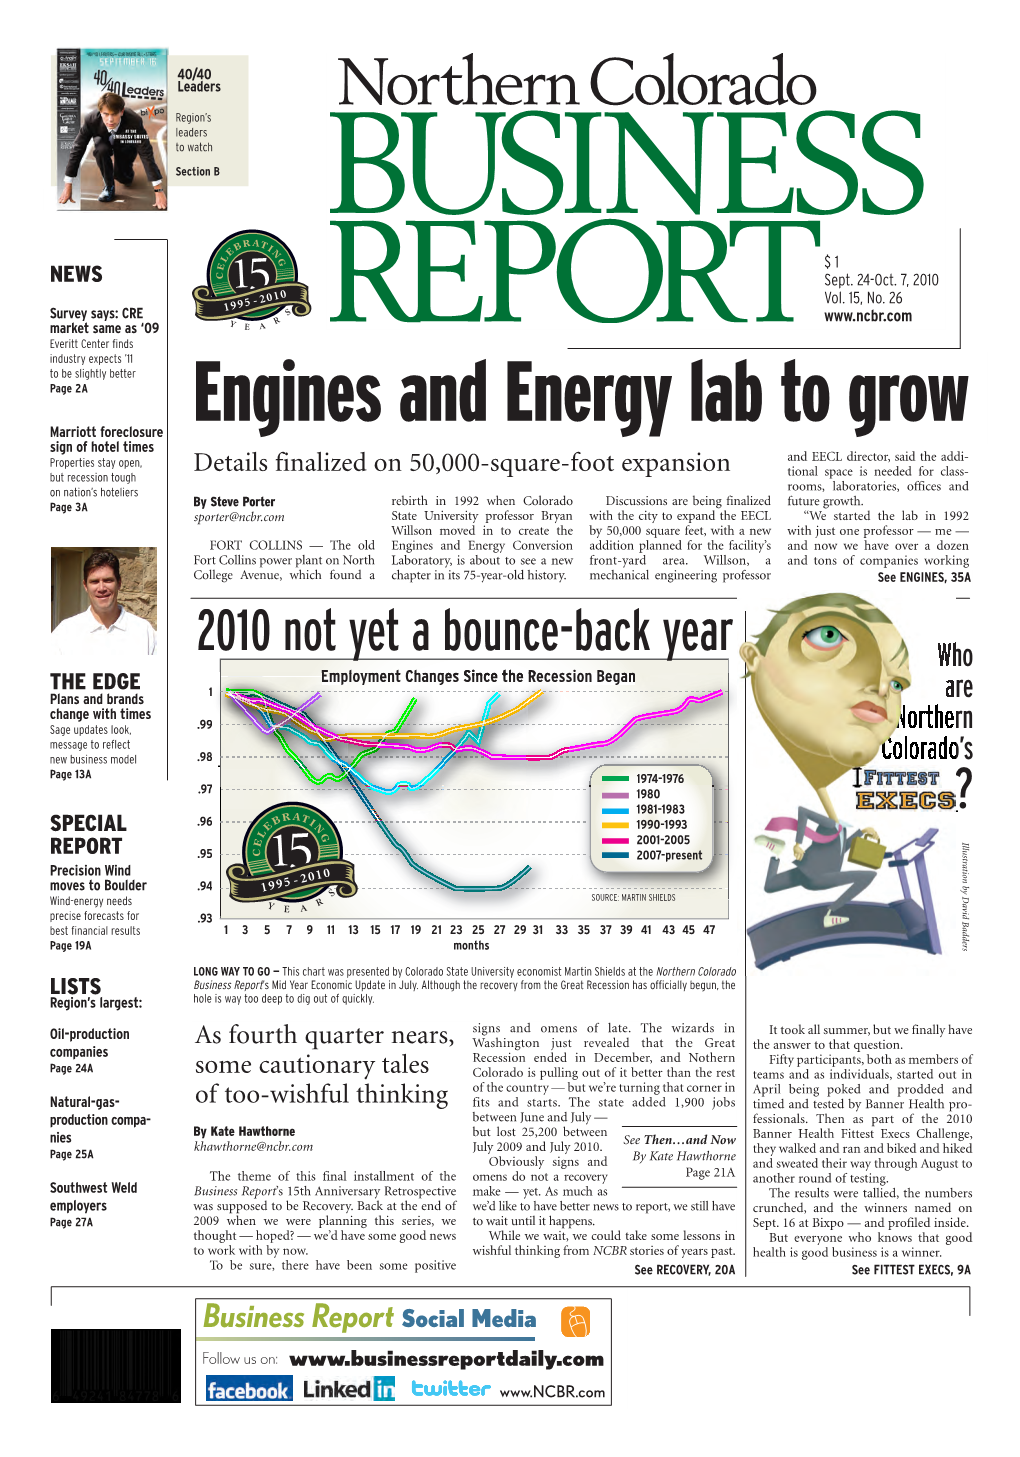 Engines and Energy Lab to Grow